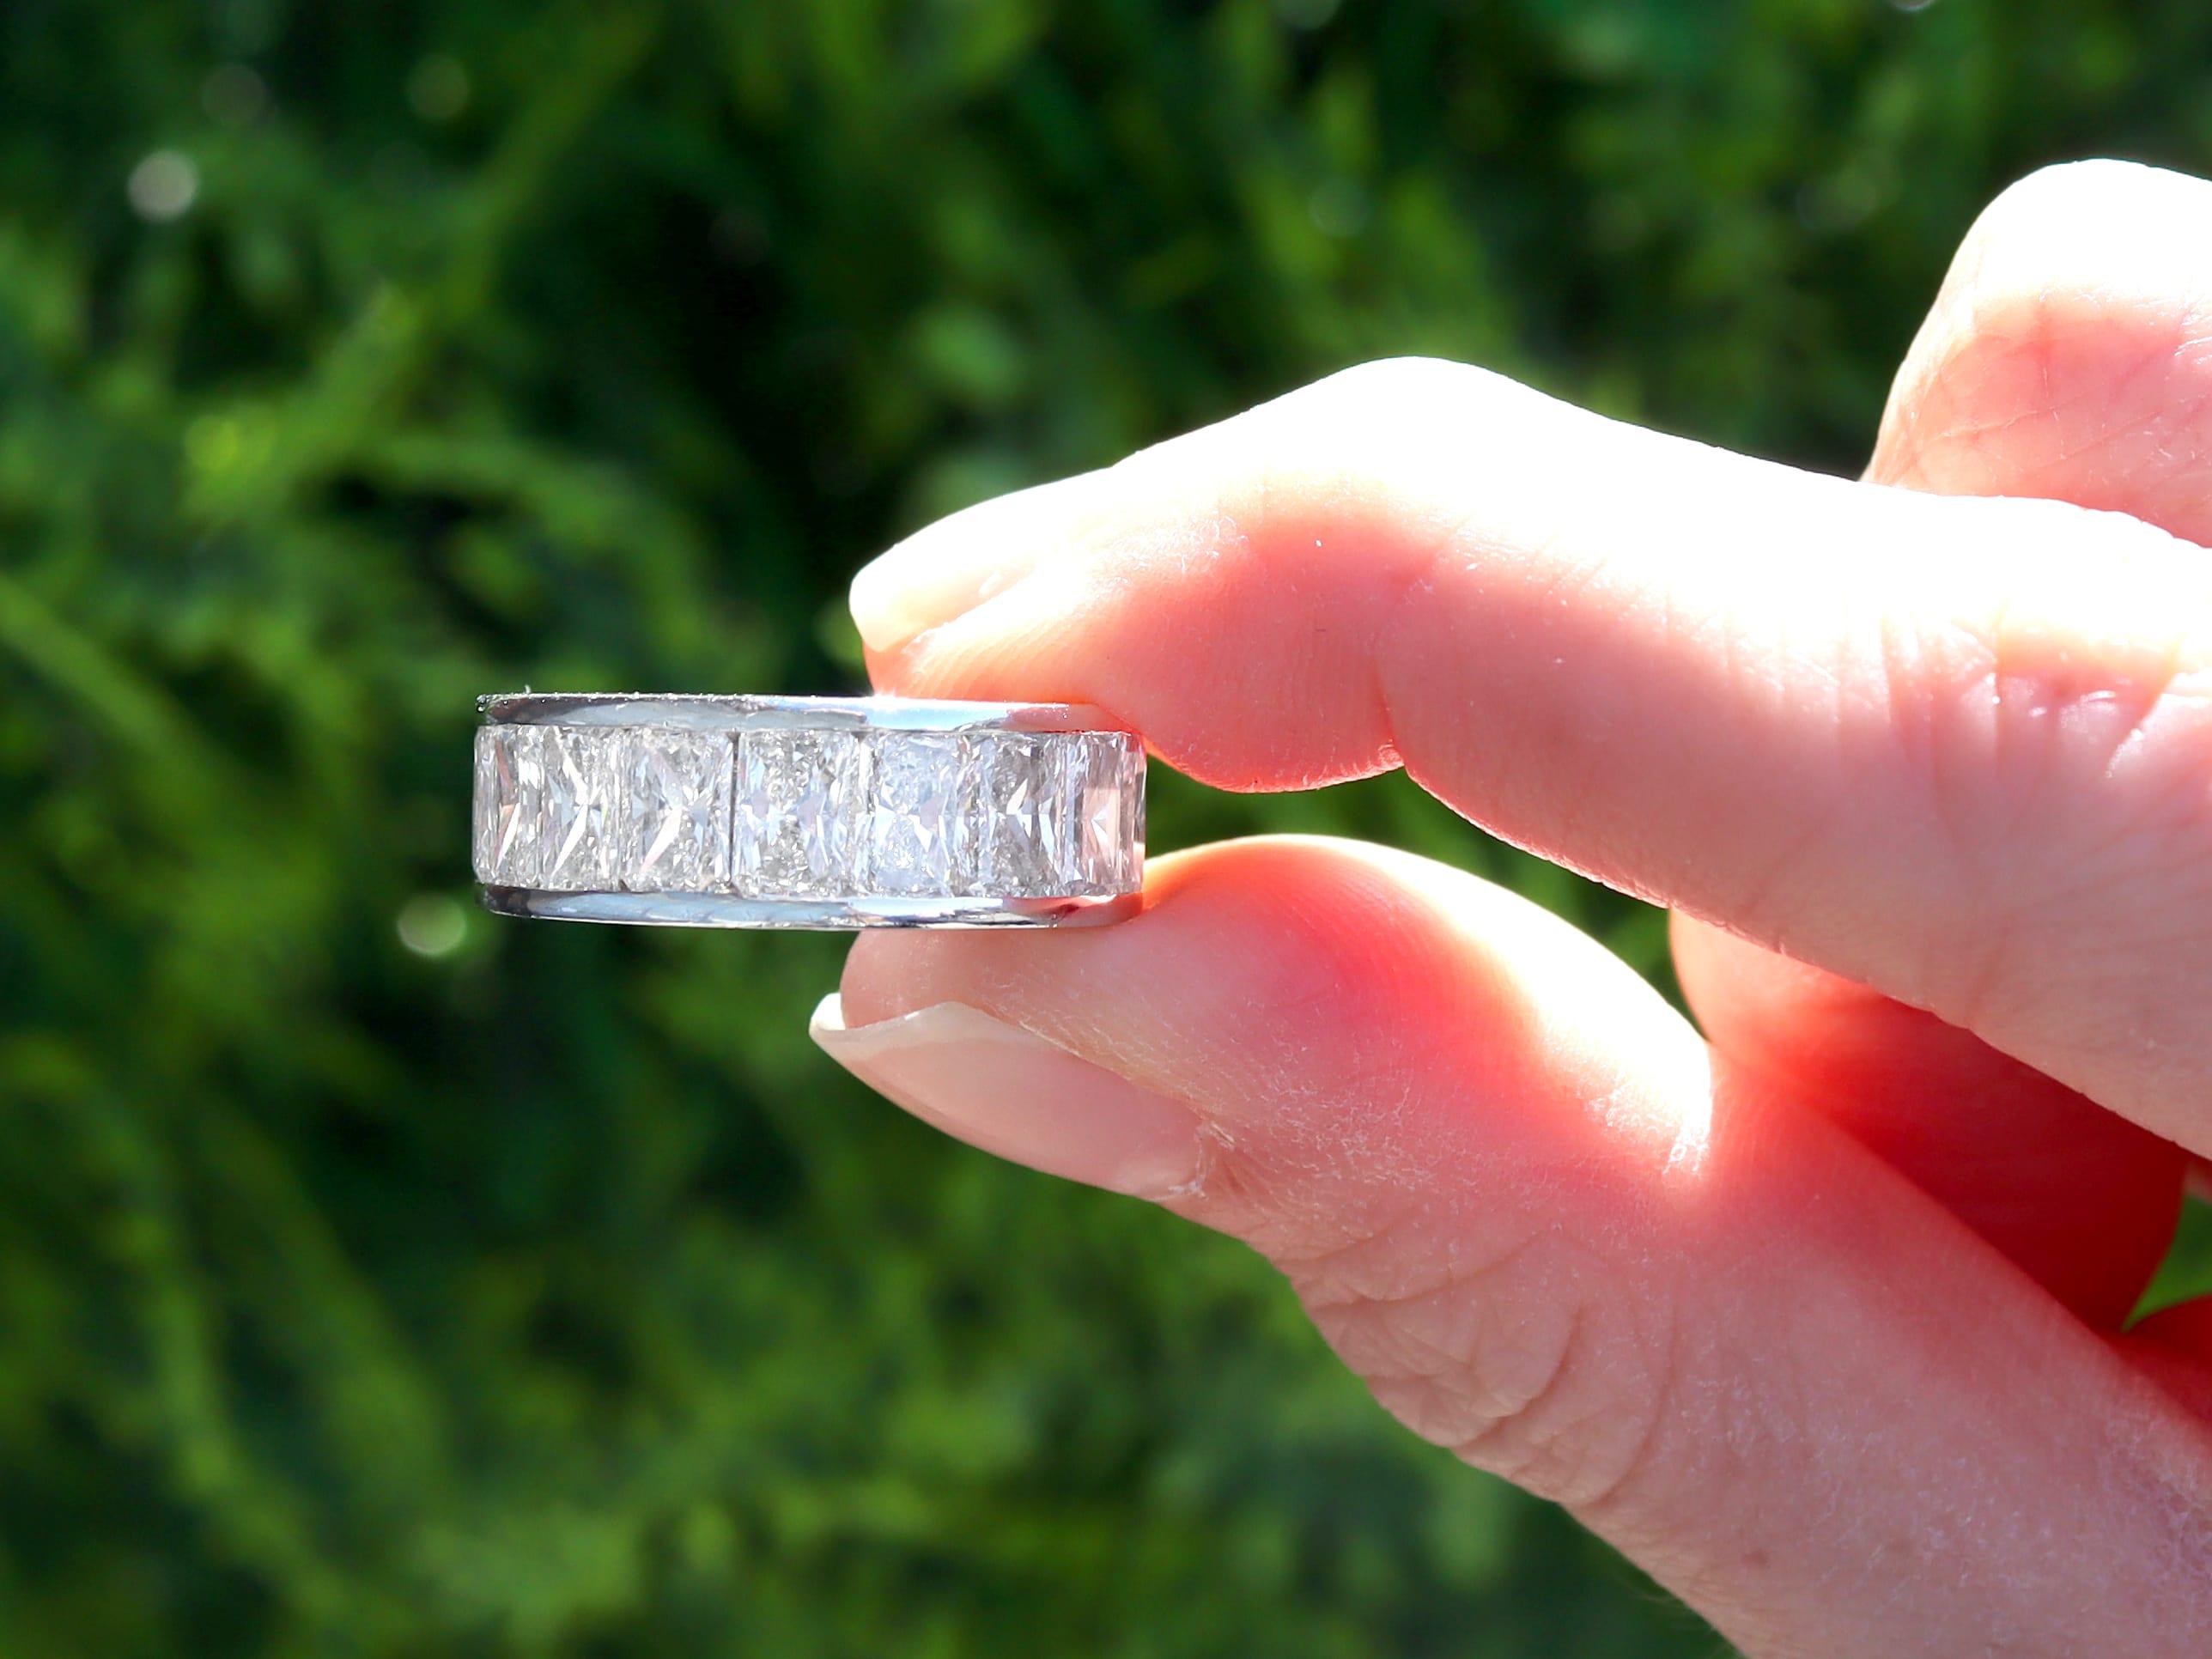 A magnificent, stunning, fine and impressive vintage 1980's 9.54 carat diamond and platinum full eternity ring; part of our diverse diamond jewellery collections.

This magnificent, fine and impressive vintage diamond eternity ring has been crafted